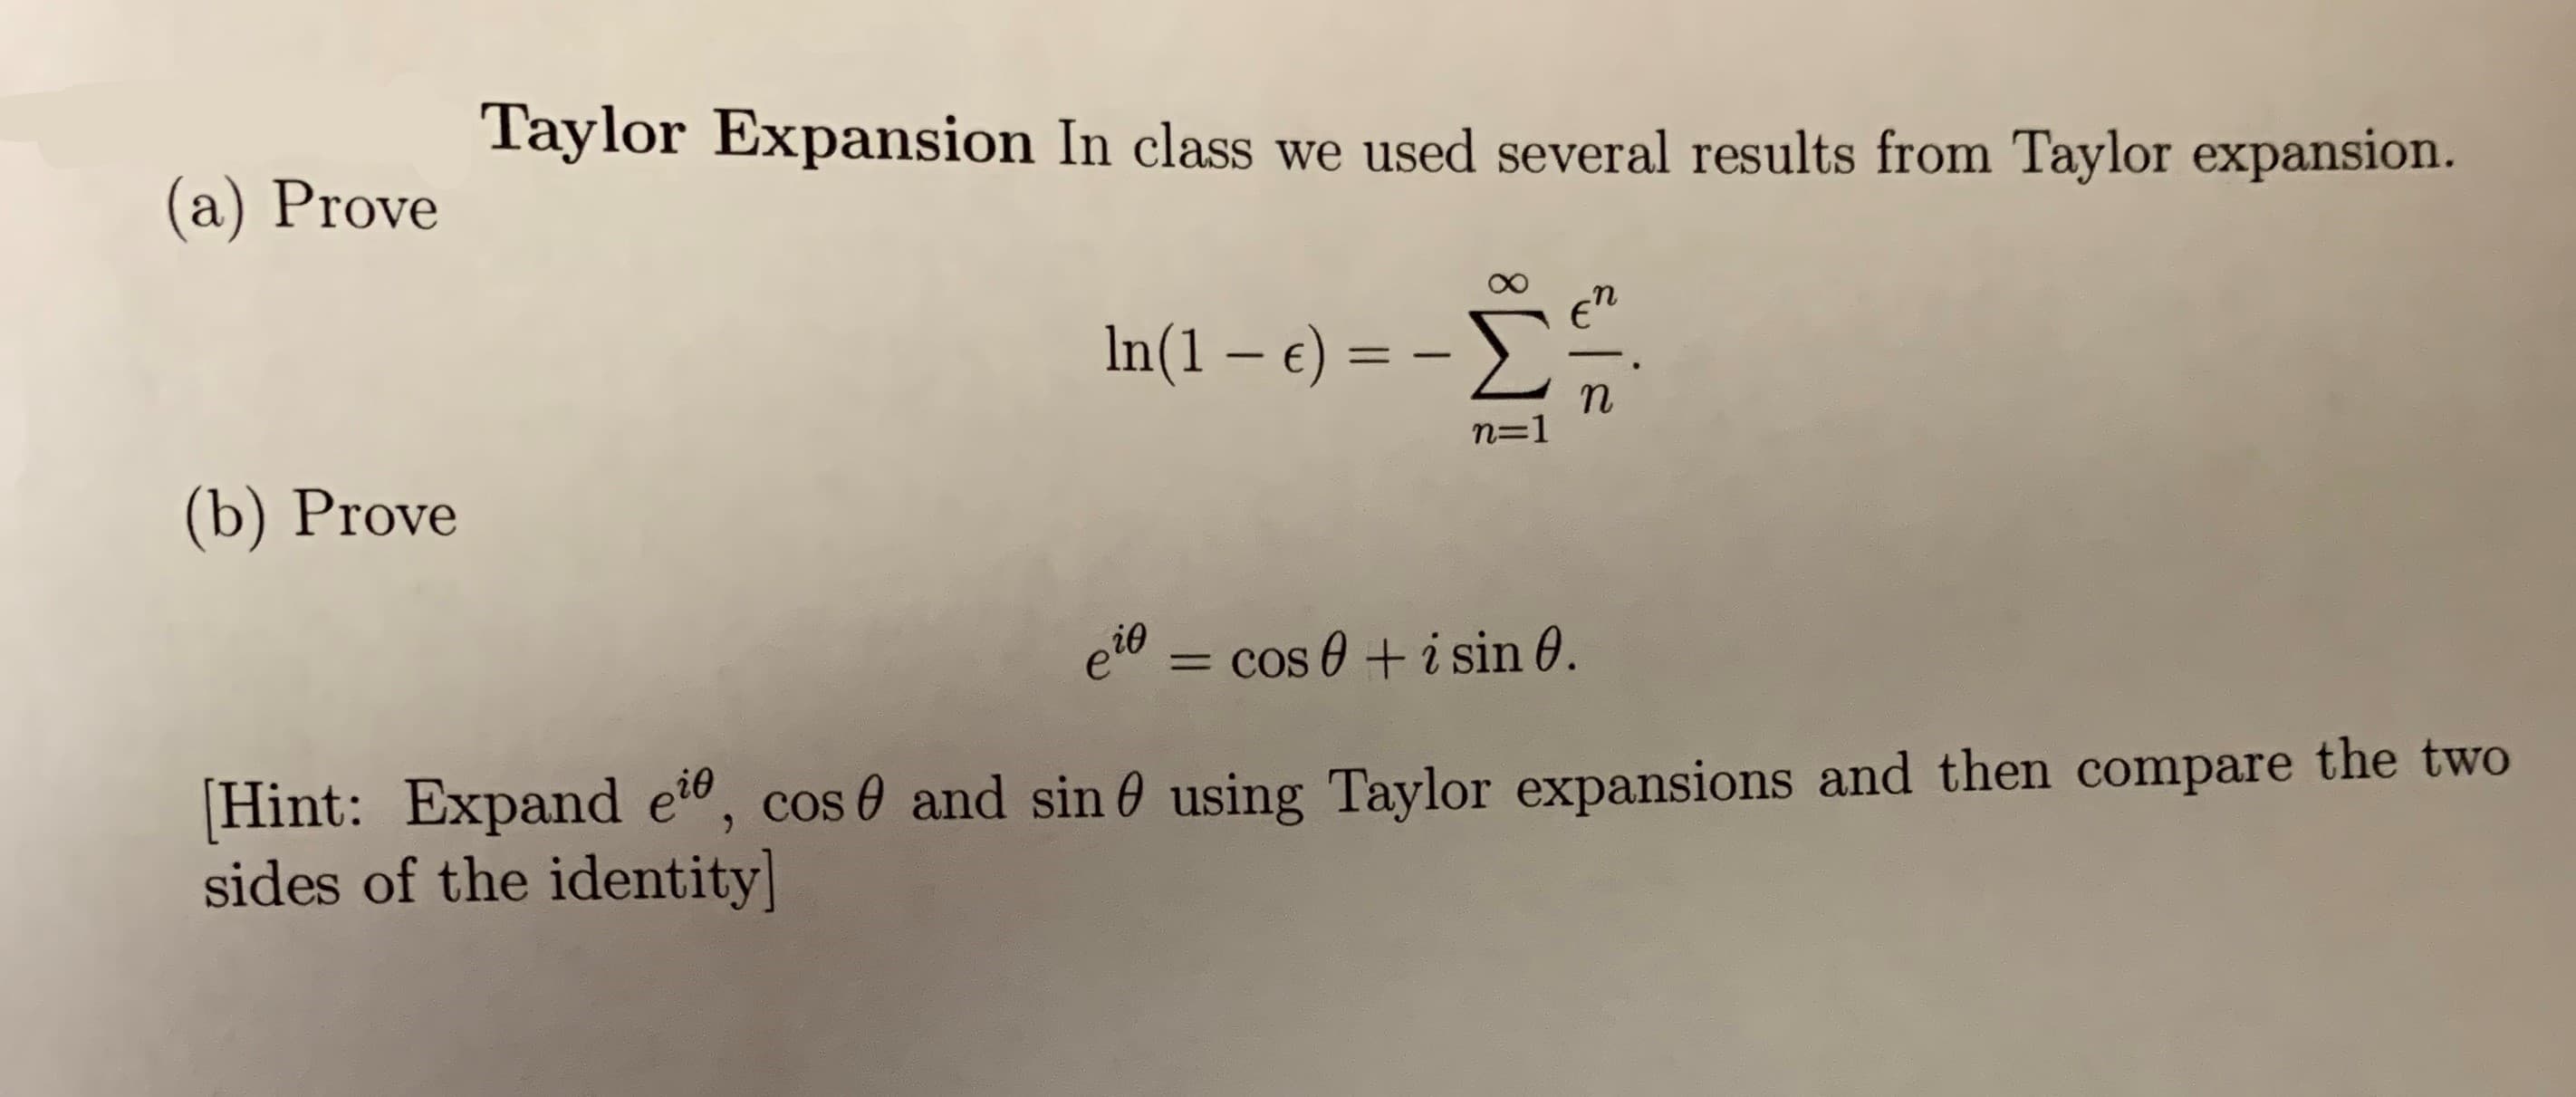 Taylor Expansion In class we used several results from Taylor expansion.
(a) Prove
In(1 -e) -
n
n-1
(b) Prove
e= cos 0 i sin 0.
Hint: Expand e, cos 0 and sin 0 using Taylor expansions and then compare the two
sides of the identity
